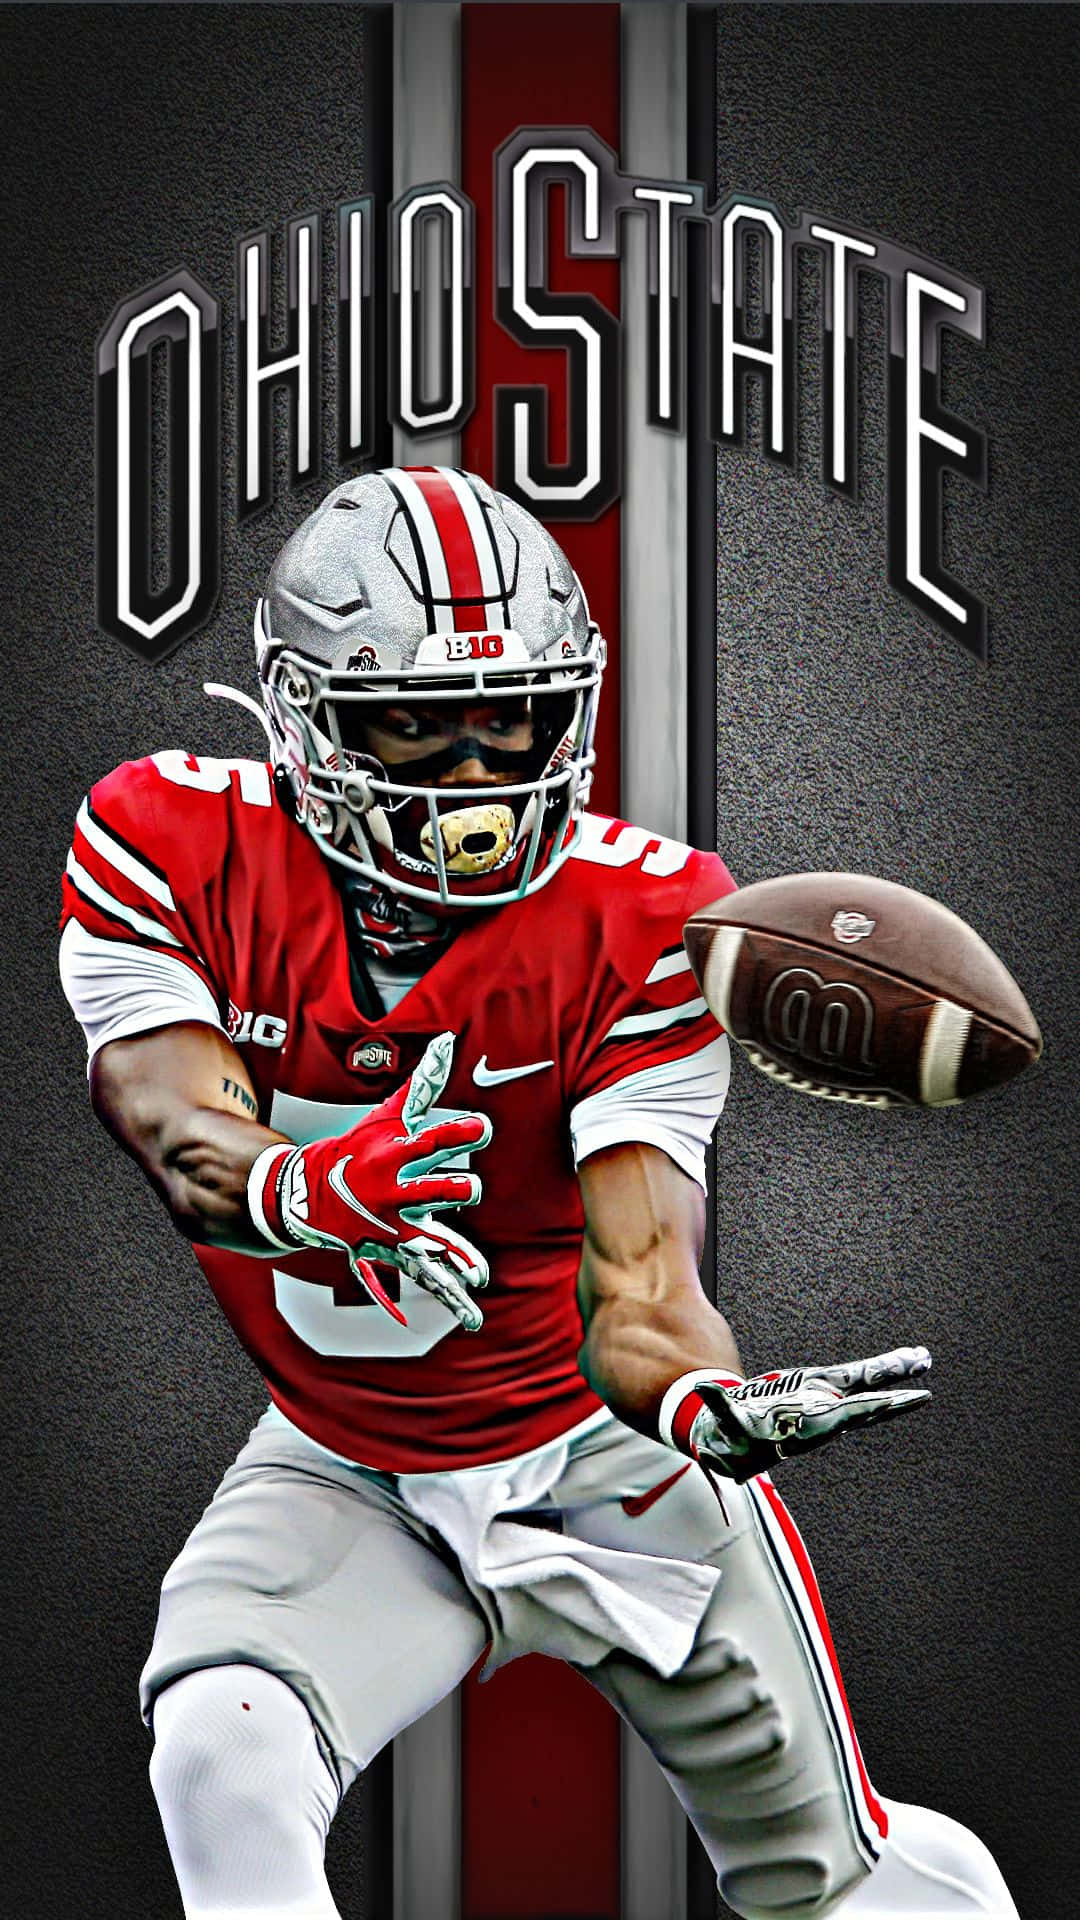 Download Amazing Ohio State Football Team Player Graphic Art Wallpaper